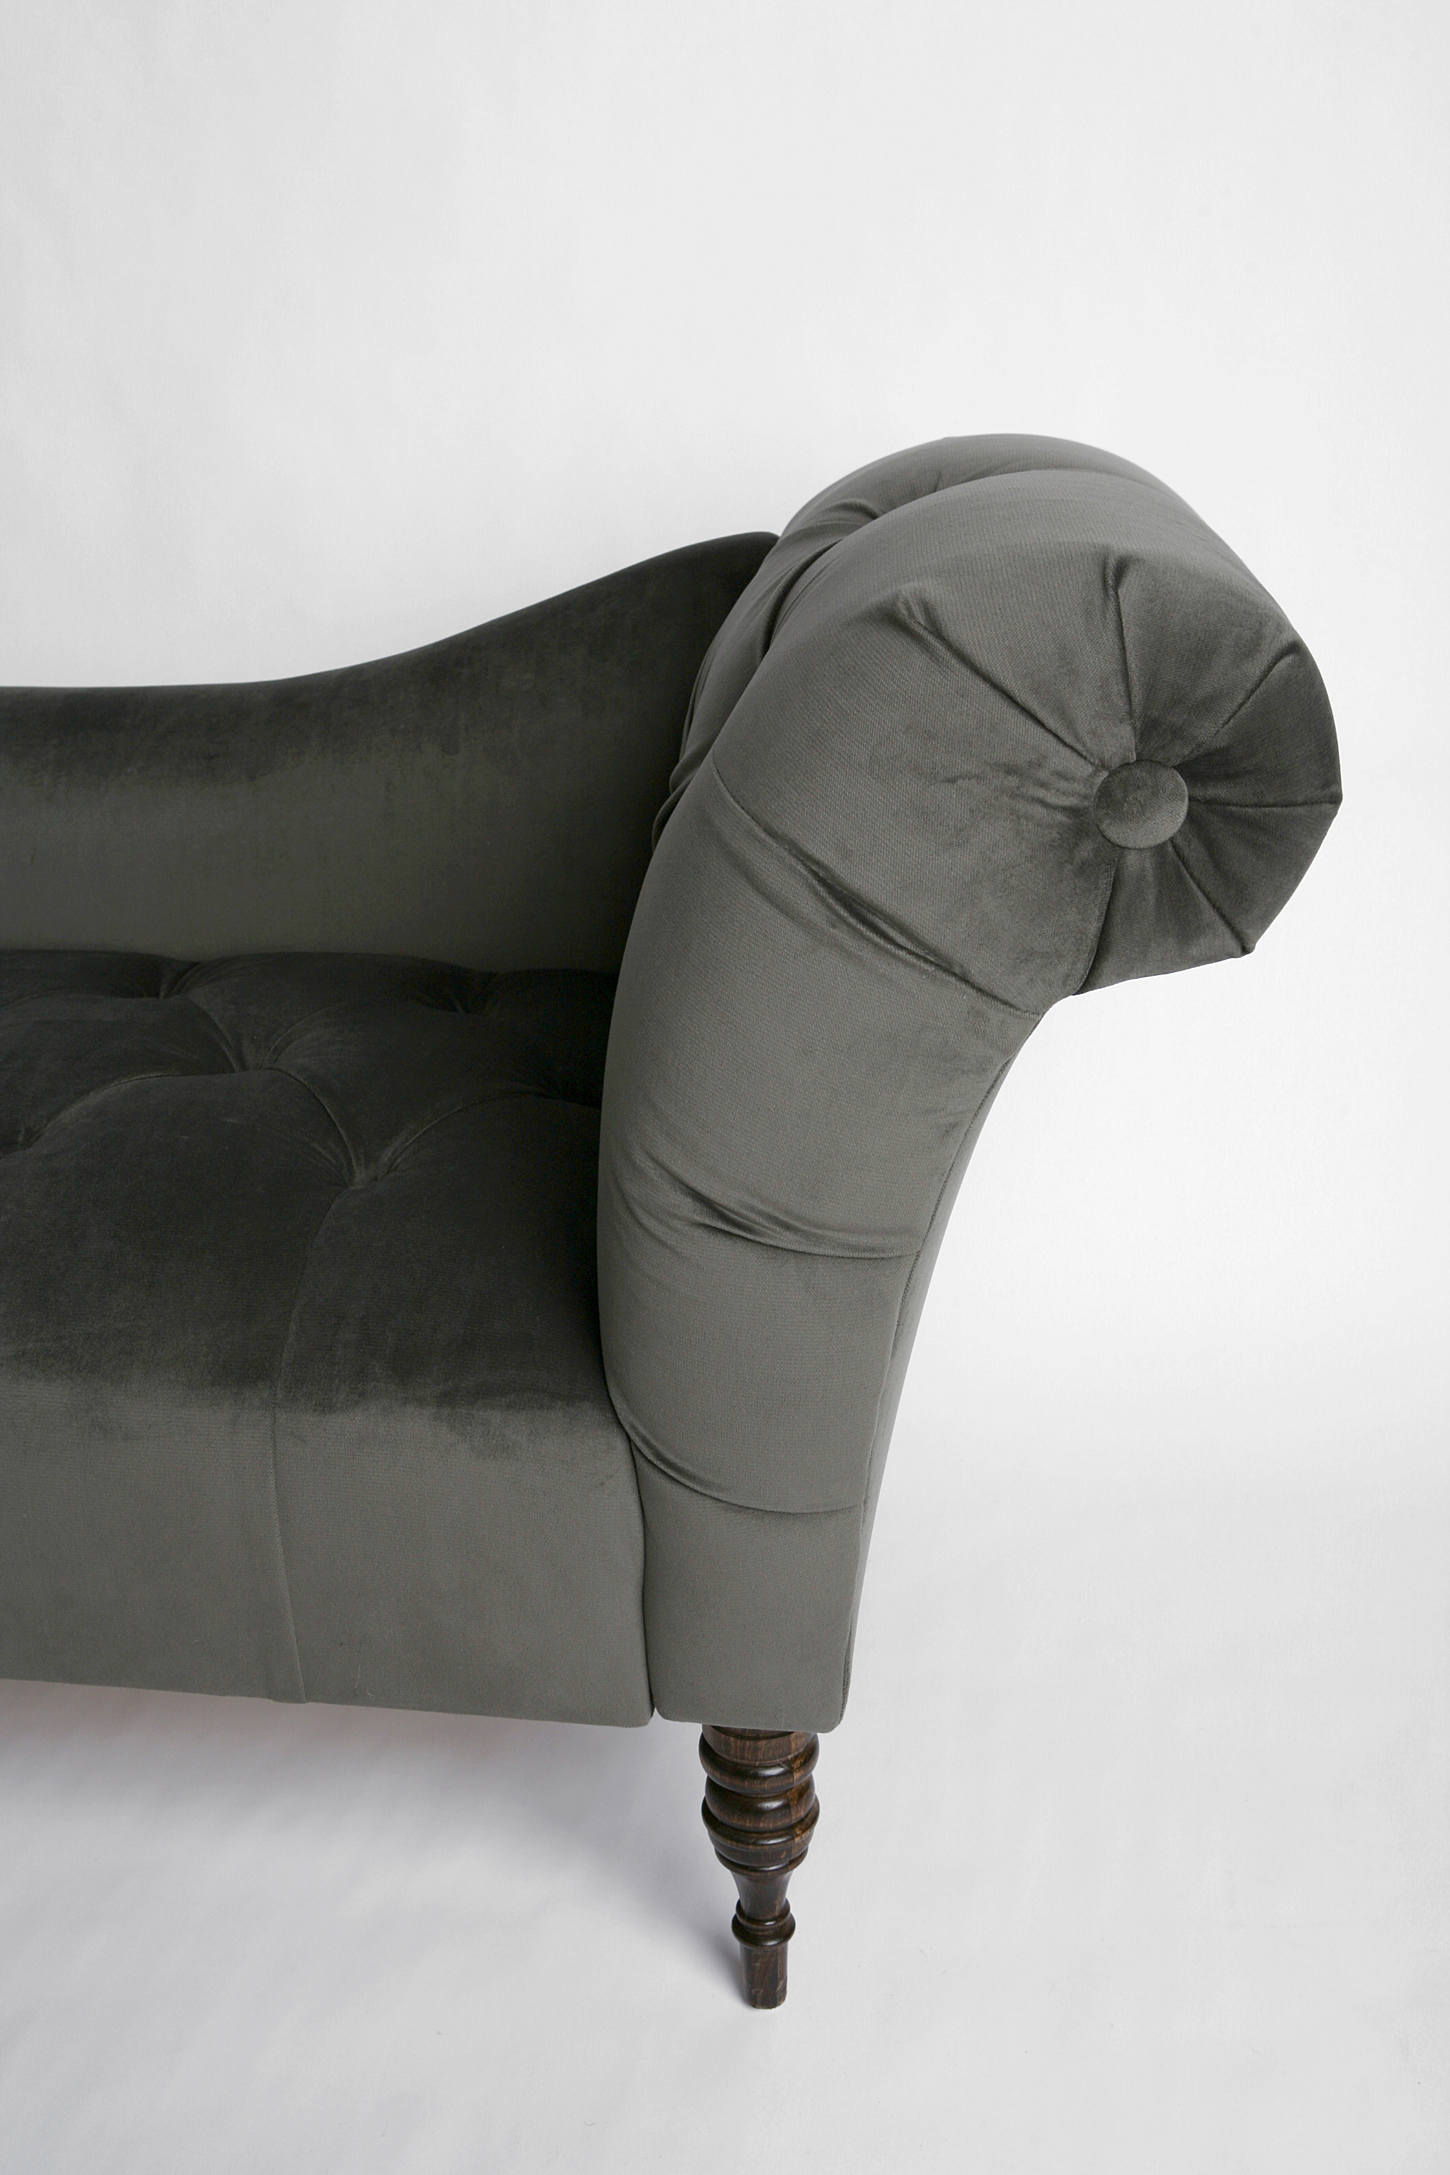 Antoinette Fainting Sofa Carbon Urban Outfitters